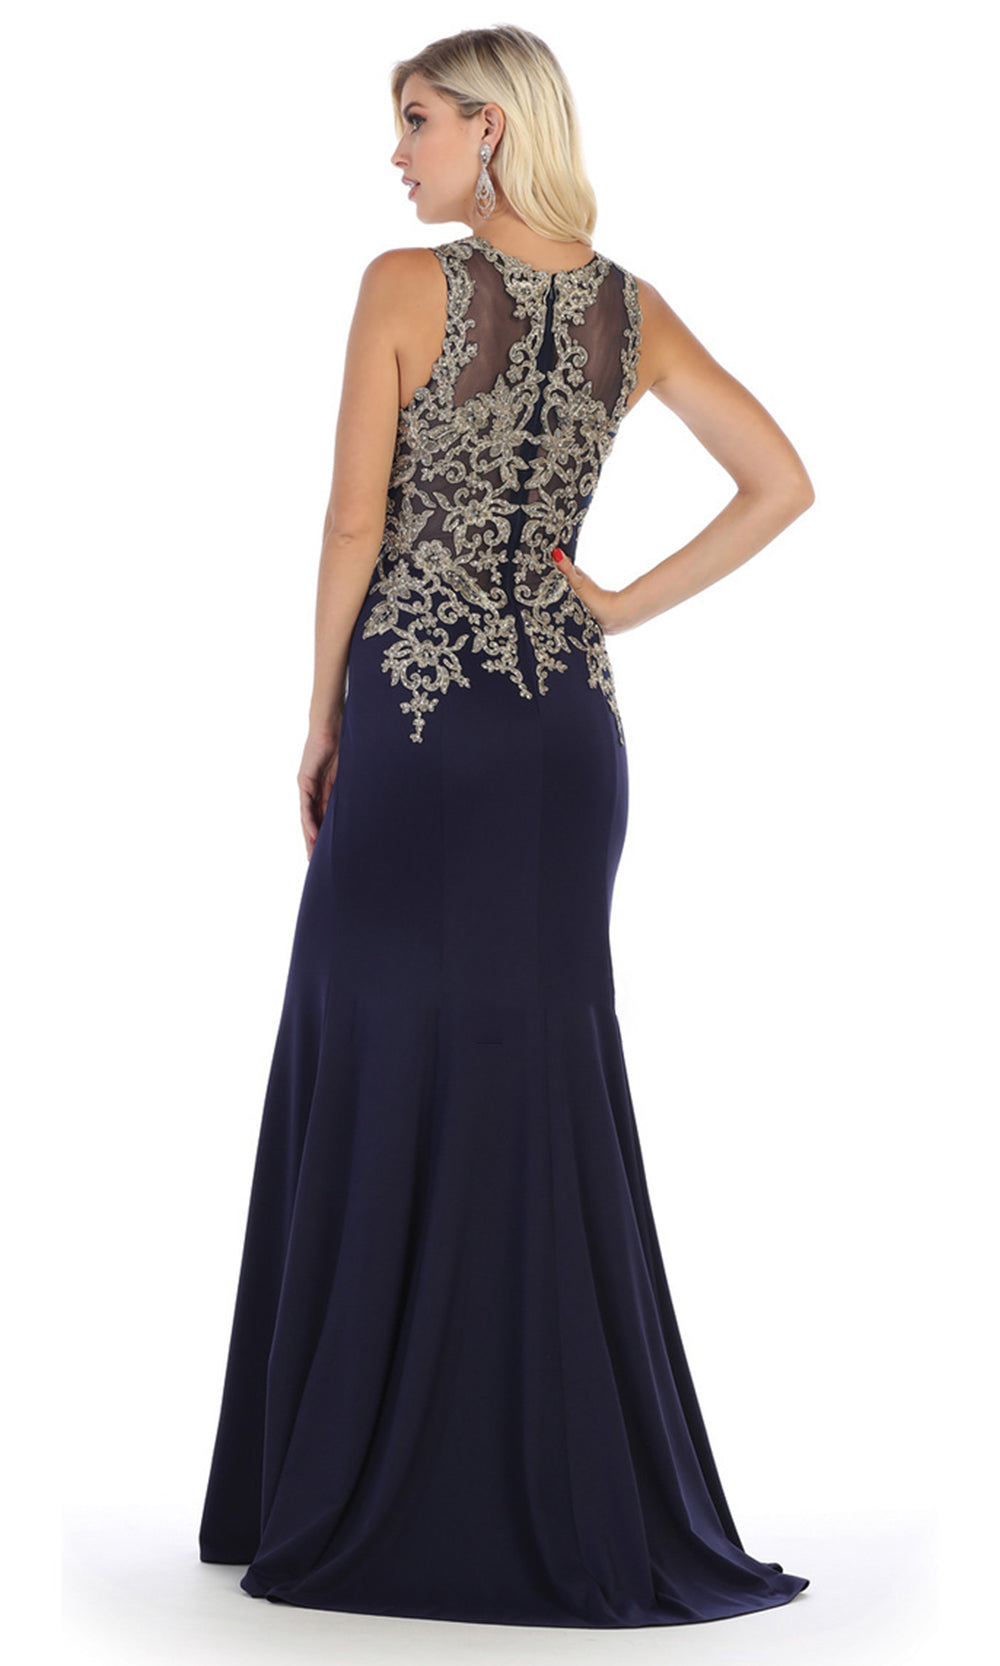 May Queen - MQ1629 Beaded Illusion Jewel Dress In Blue